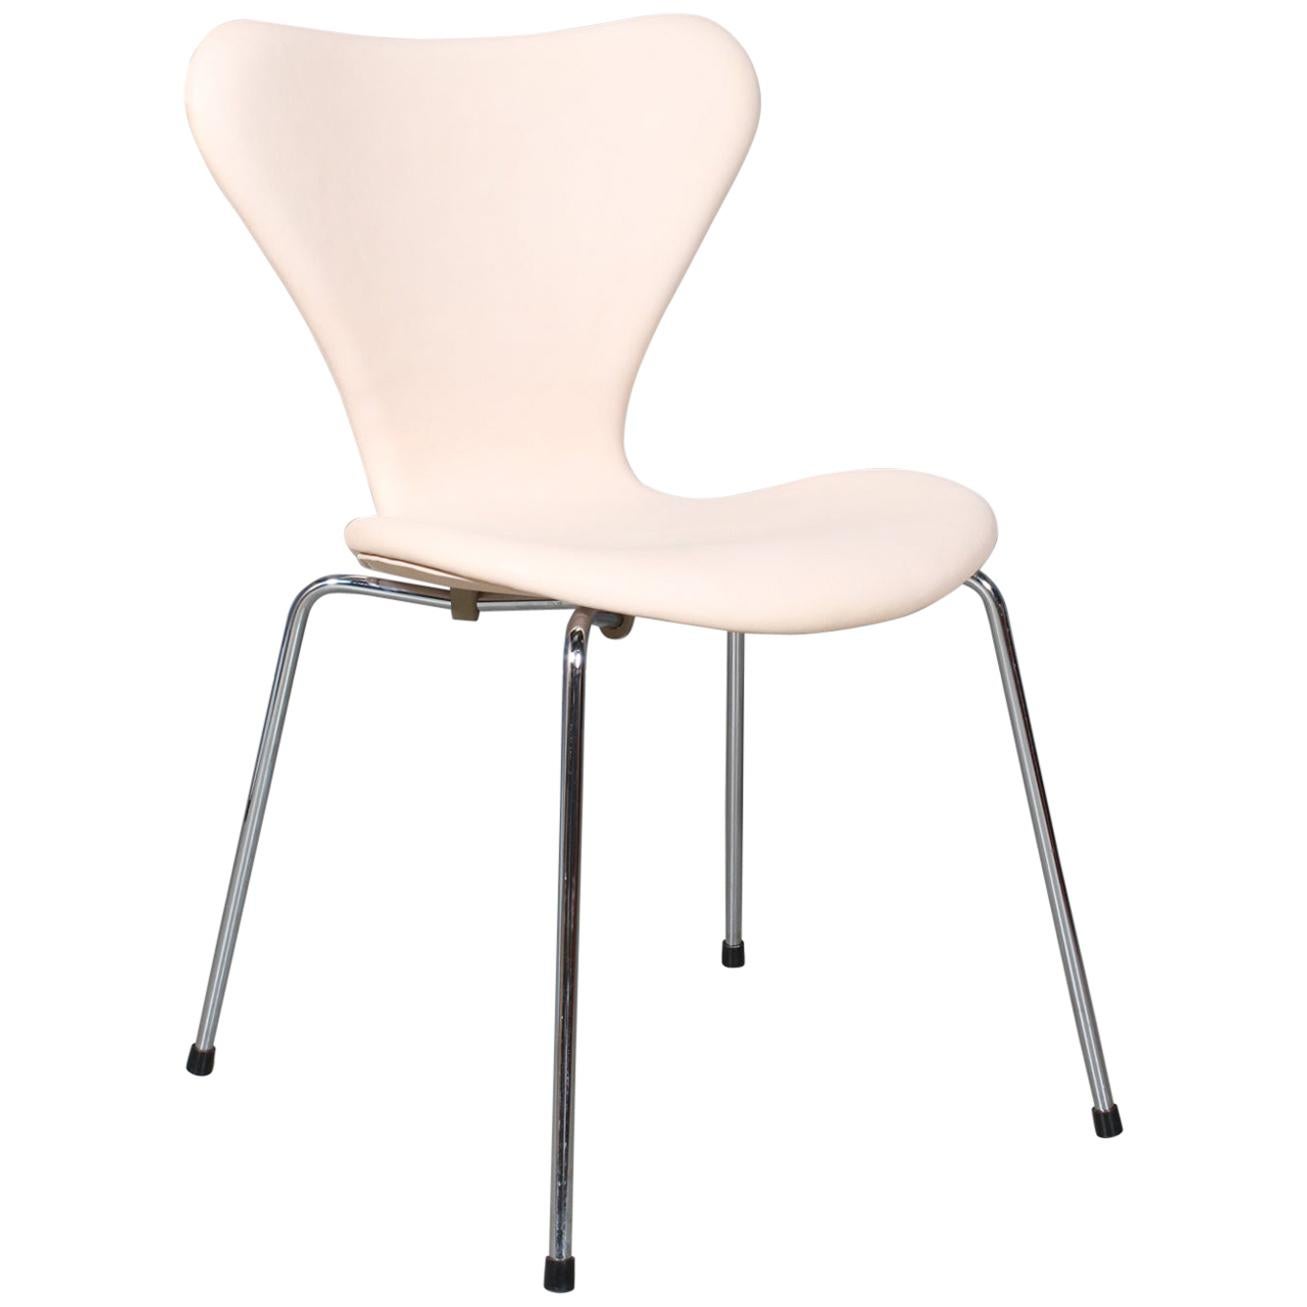 Arne Jacobsen Dining Chair For Sale